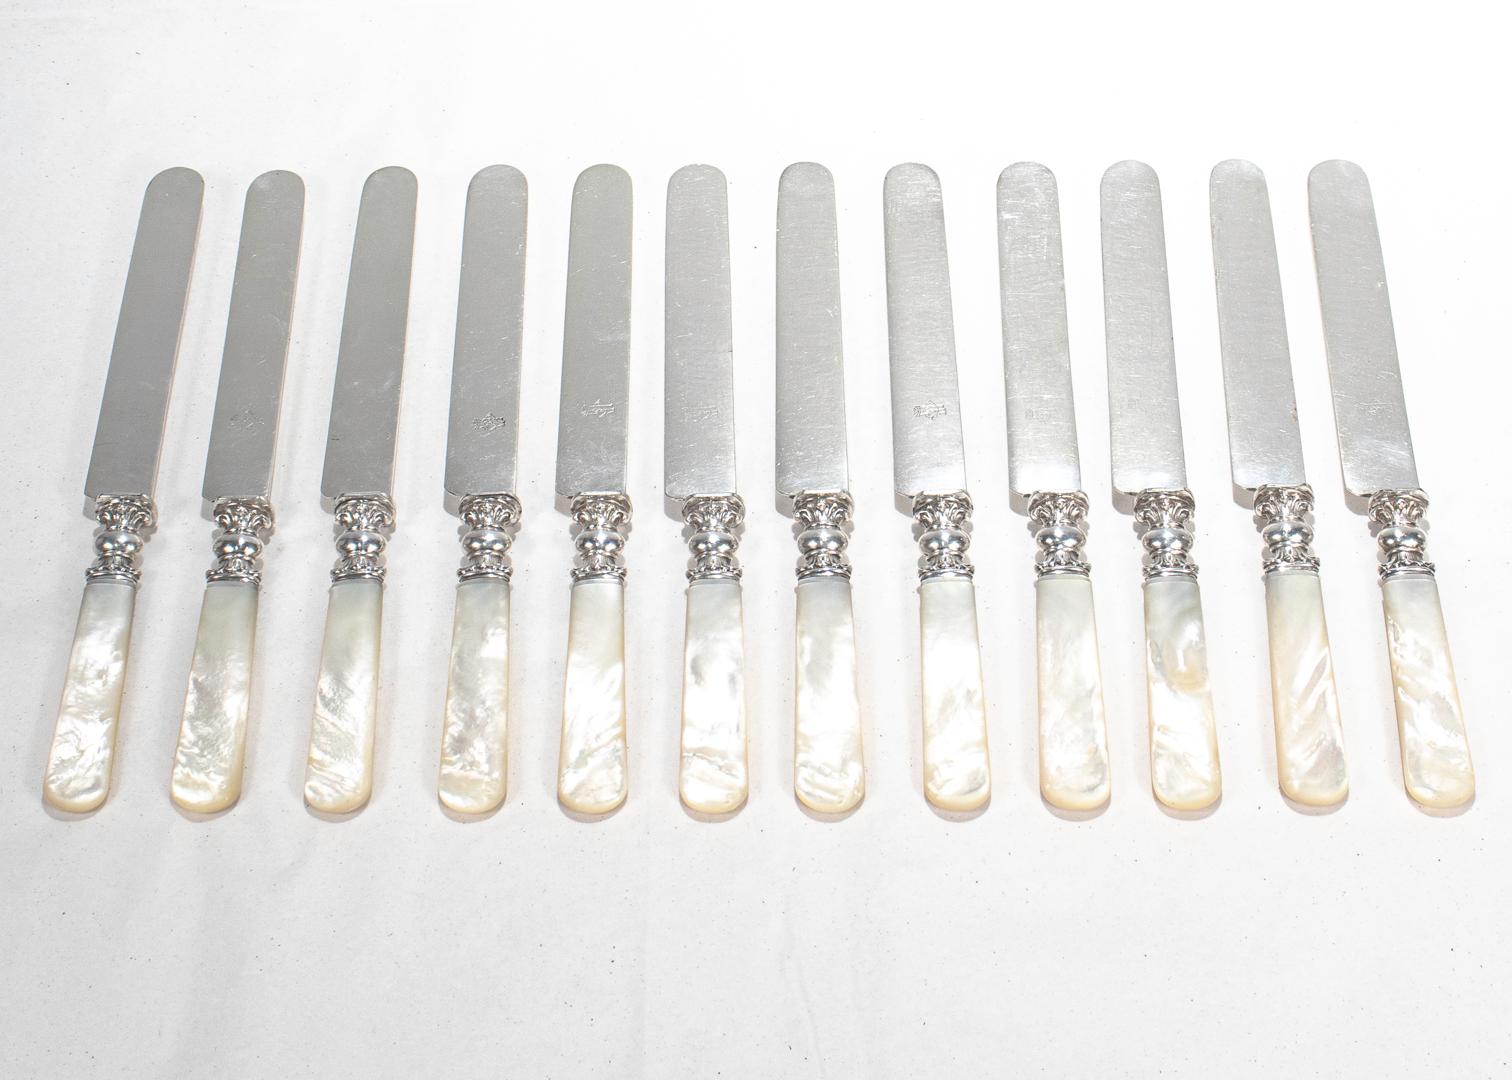 A complete set of 12 mother of pearl knives.

A real rarity in the full dinner knife size.

Each with a silver-plated blade, solid carved mother of pearl handle, and a sterling silver ferrules. 

These knives are simply well crafted and of